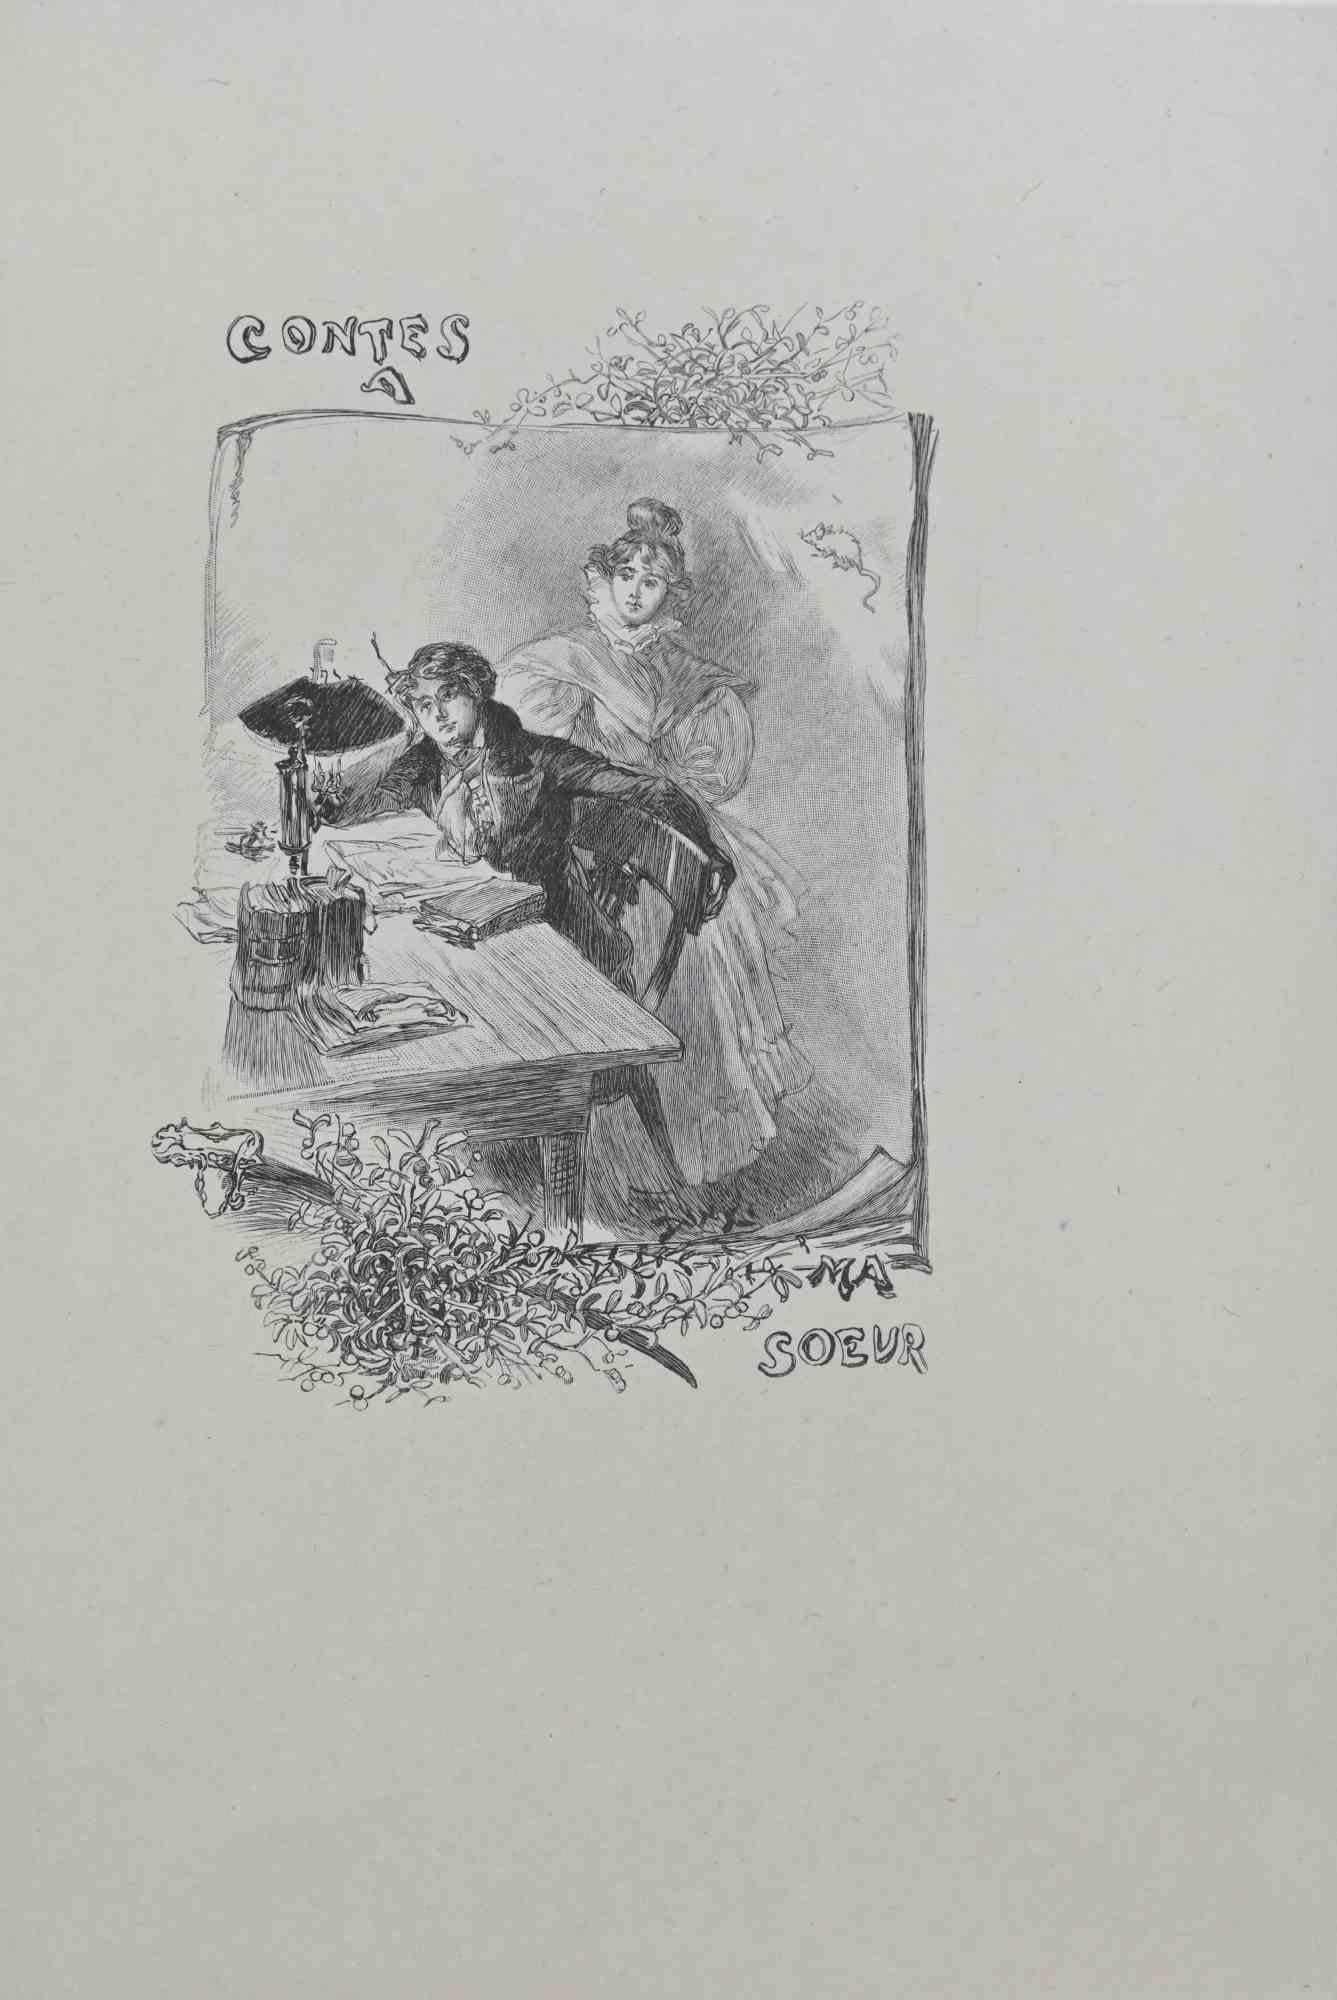 Petits Contes à ma Sœur is a lithographon paper realized by Hégésippe Moreau,  dated 1838 s.

The artwork  is in good condition.

Hégésippe Moreau (1810-1838) was a French lyric poet. The romantic myth was solidified by the publication of his